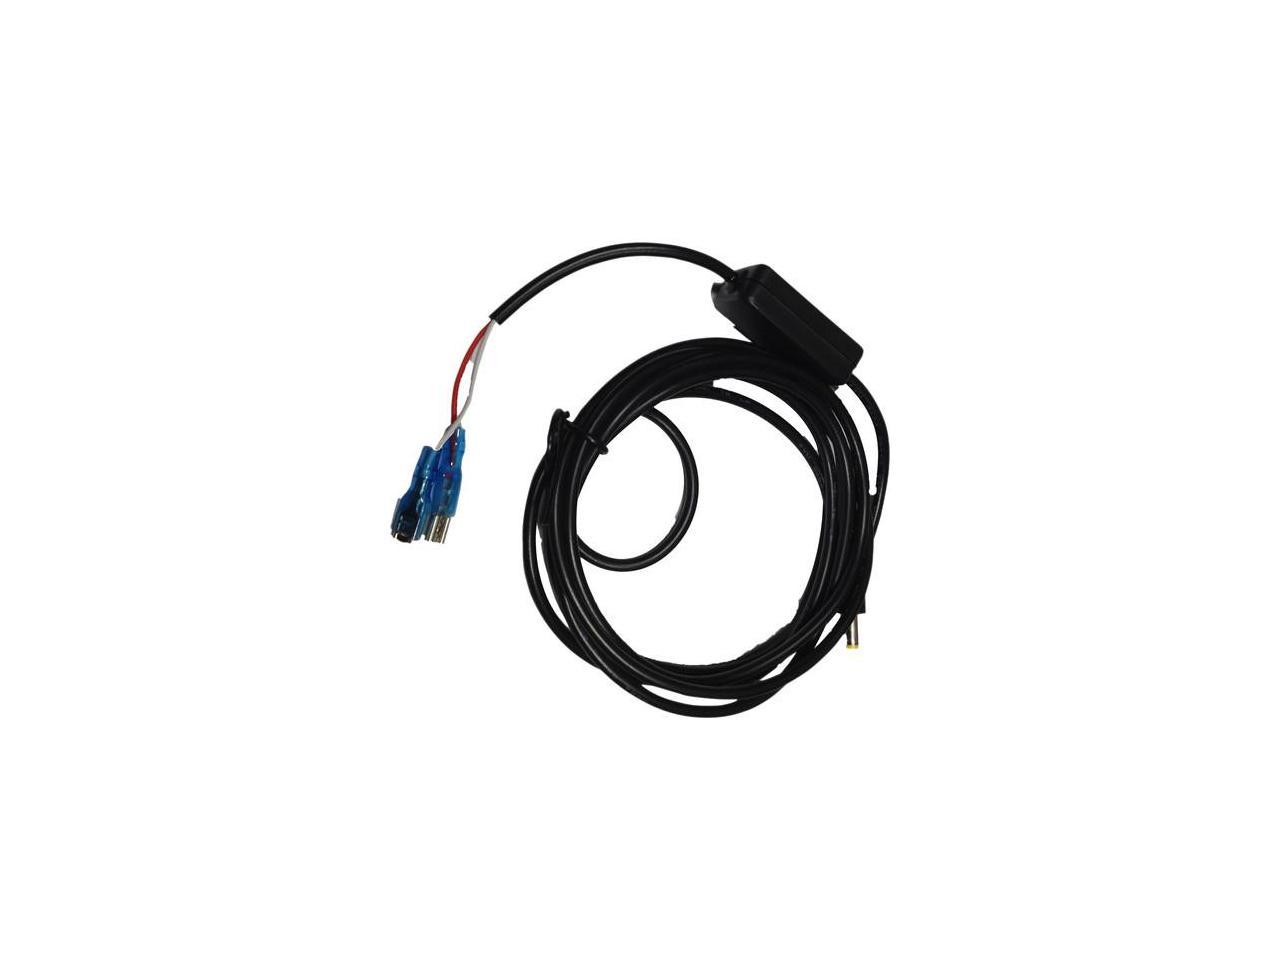 Covert 2540 Scounting Camera Converter Cable (Single Pack)